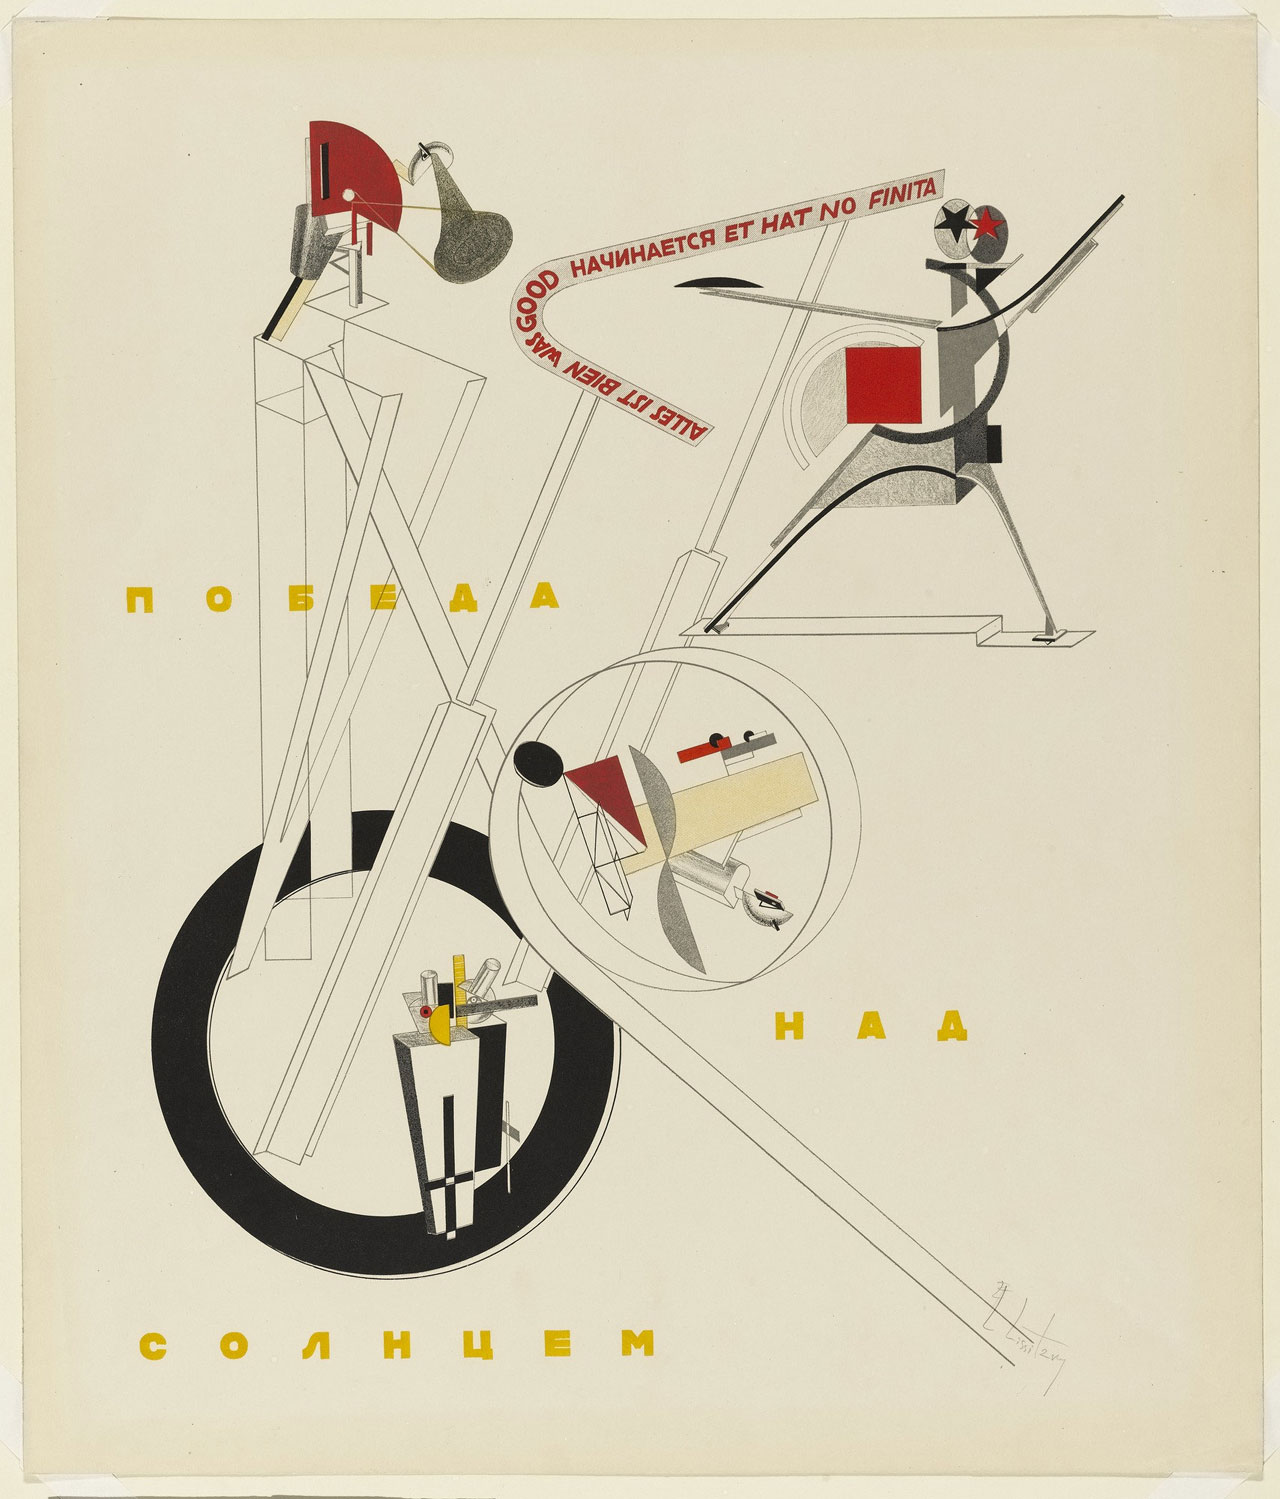 Victory over the Sun: All is well that begins well and has no end.Poster by El Lissitzky, 1913.Source Wikiart.‘for illustrative purposes only’